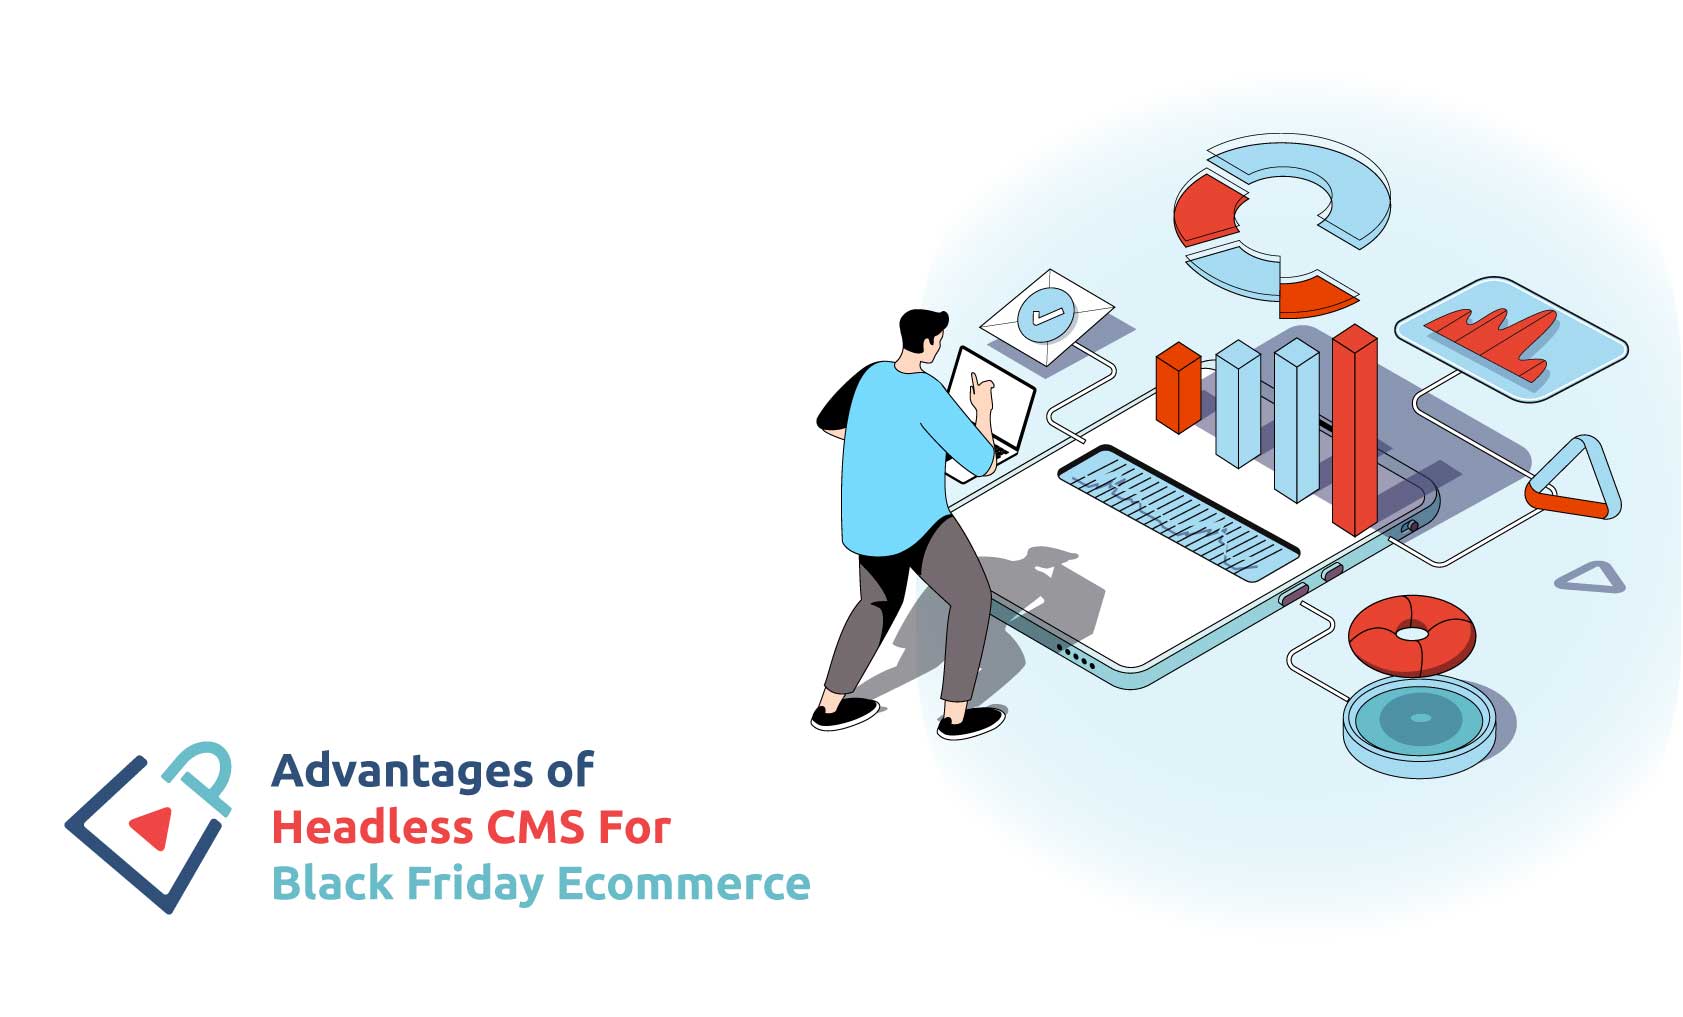 Advantages of using a headless CMS vs PIM for black friday localization and mobile mcommerce experiences